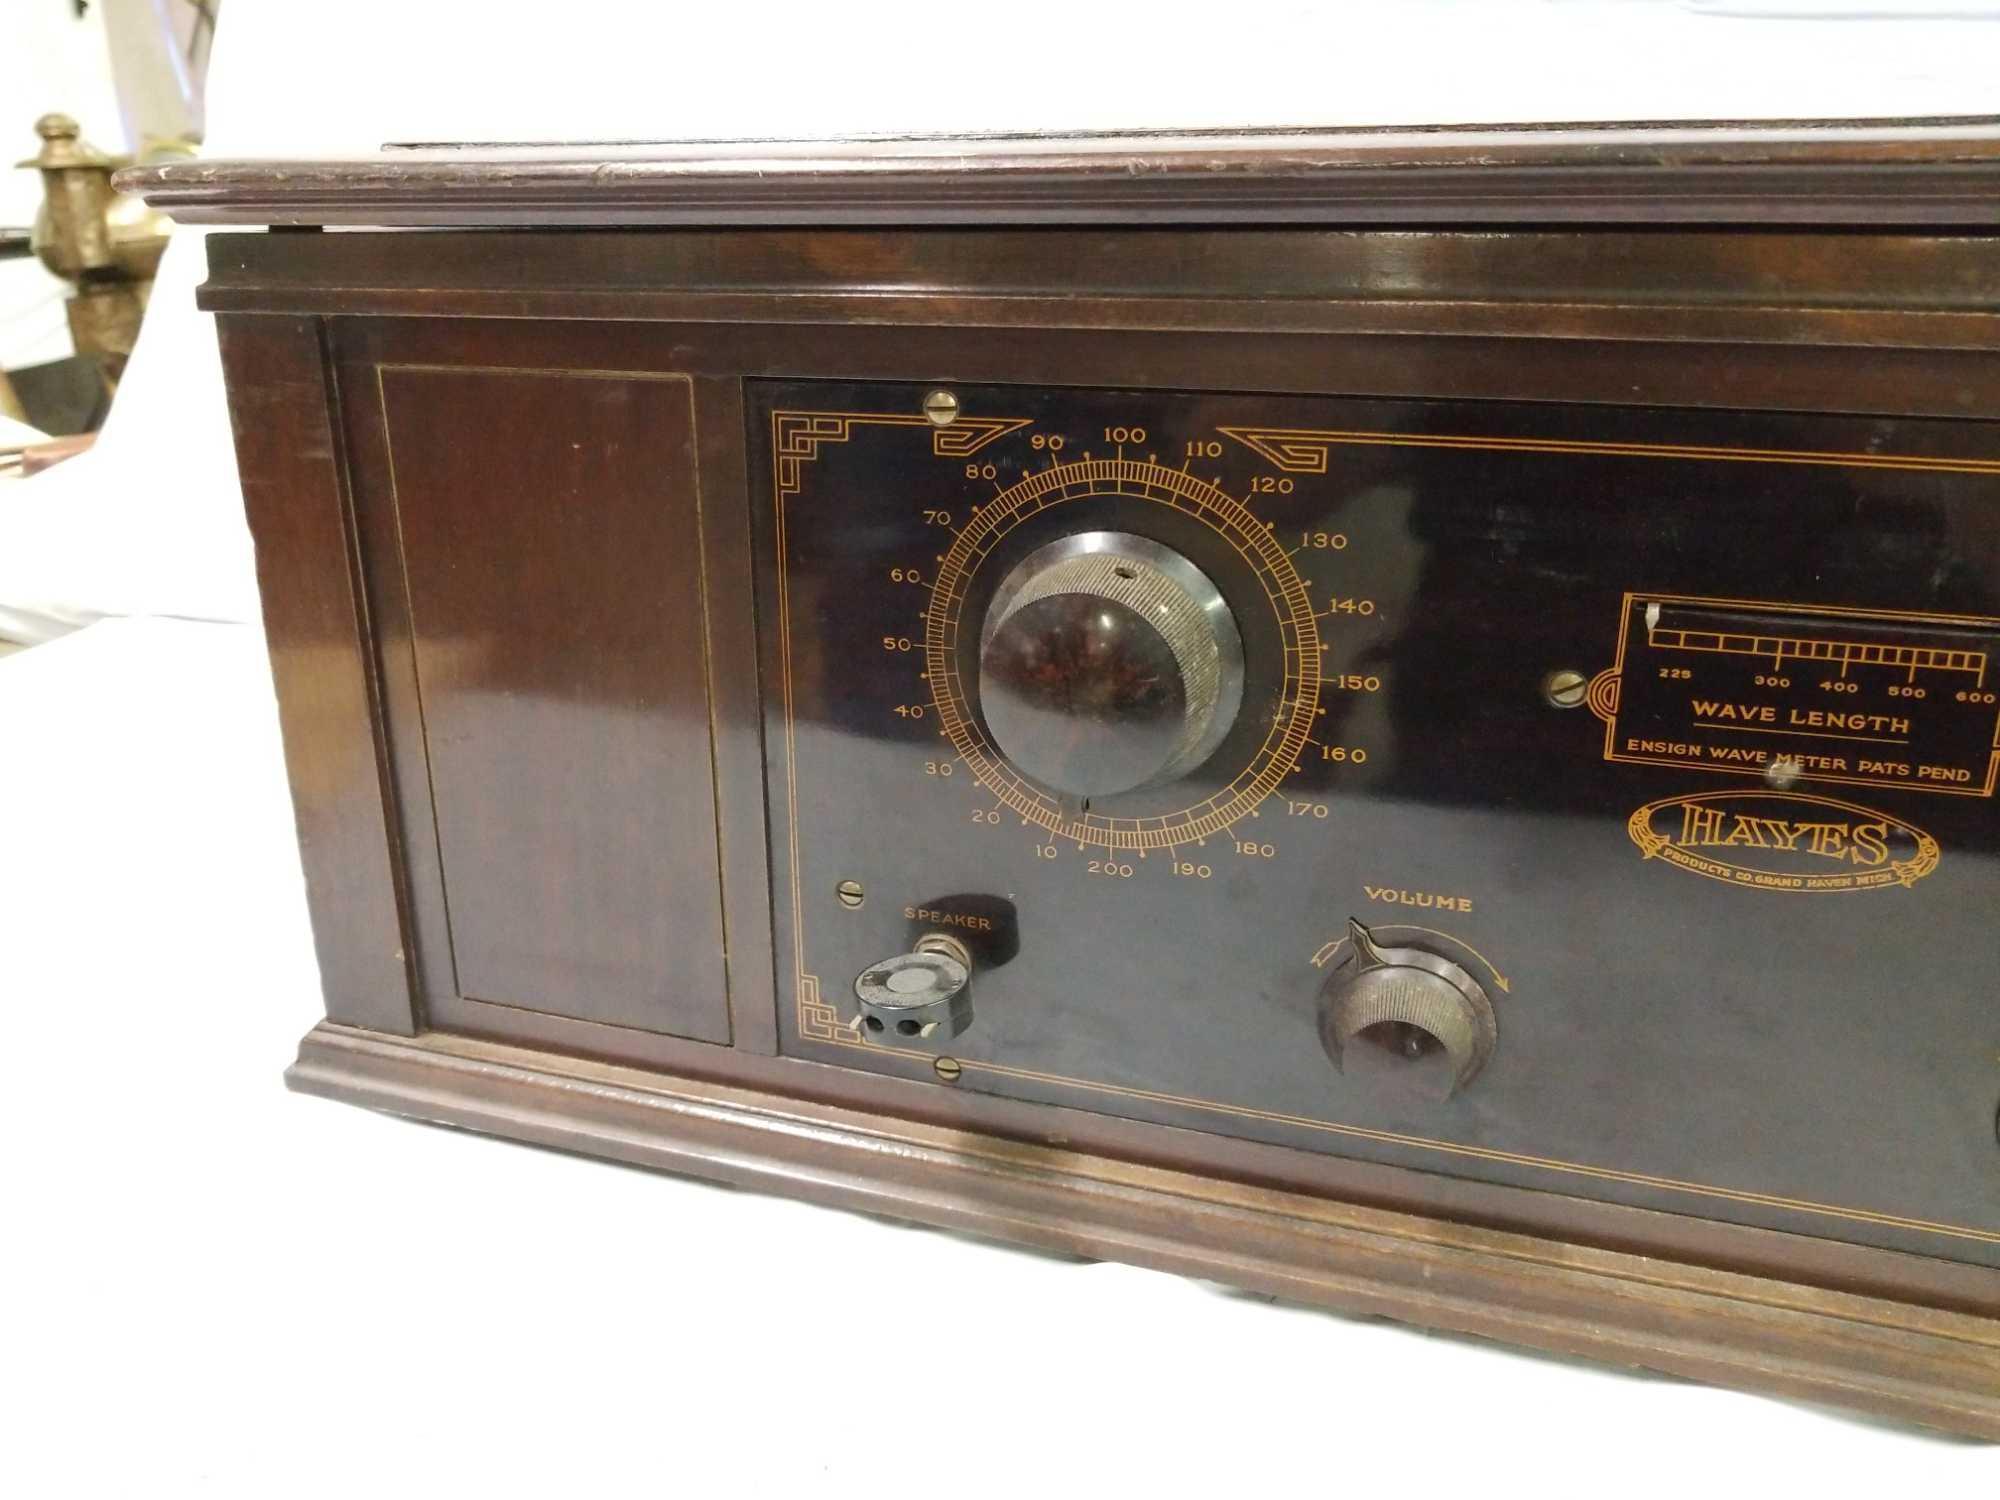 Hayes 2-Dial 5-Tube Radio Set with Ensign Automatic Wave Meter. Manufactured by the Hayes Products